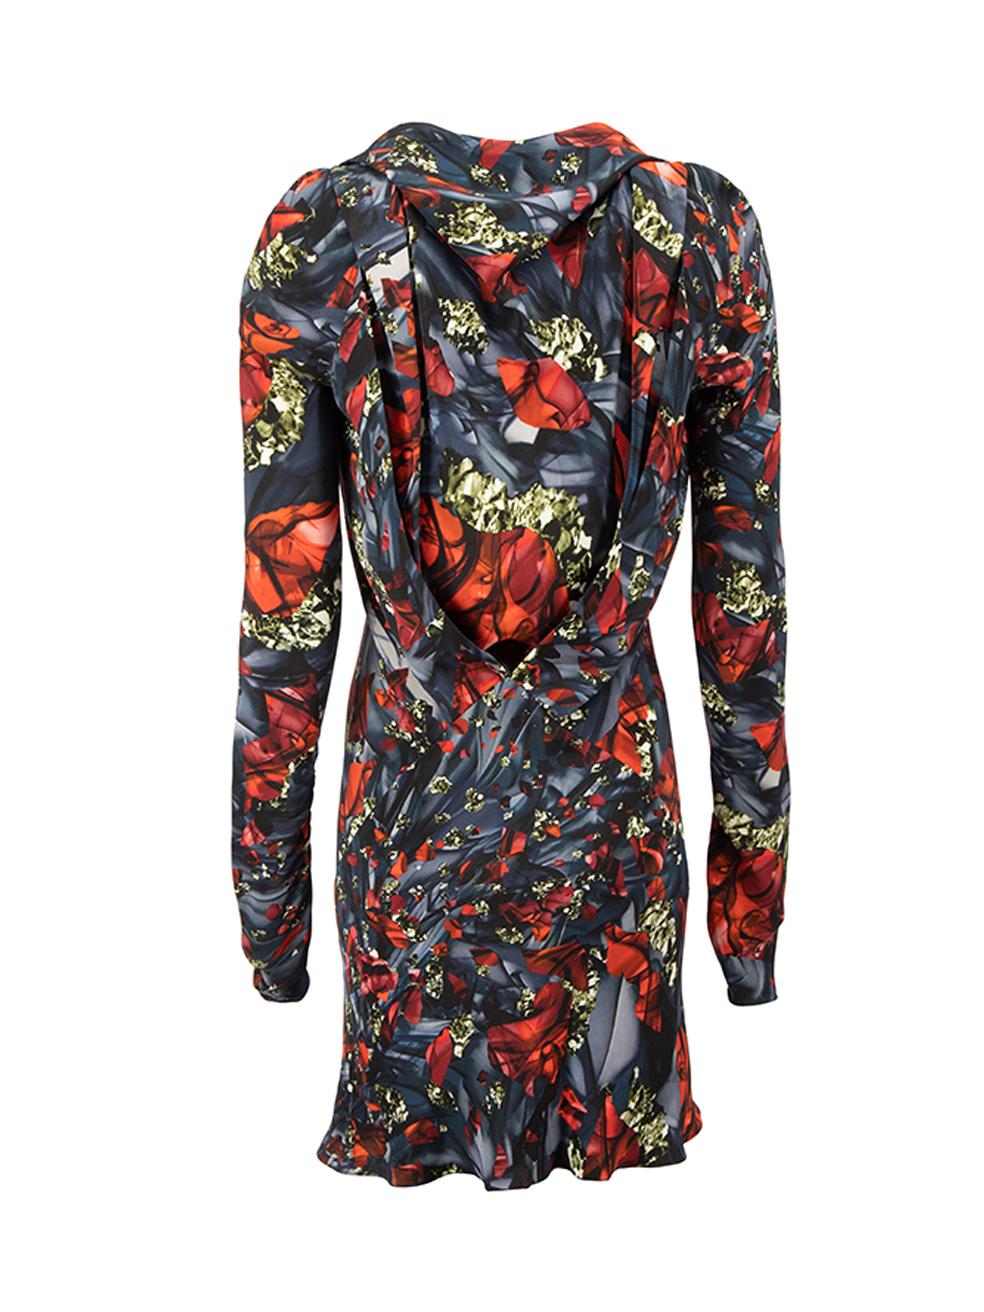 Peter Pilotto Women's Navy & Red Silk Printed Mini Dress In Good Condition For Sale In London, GB